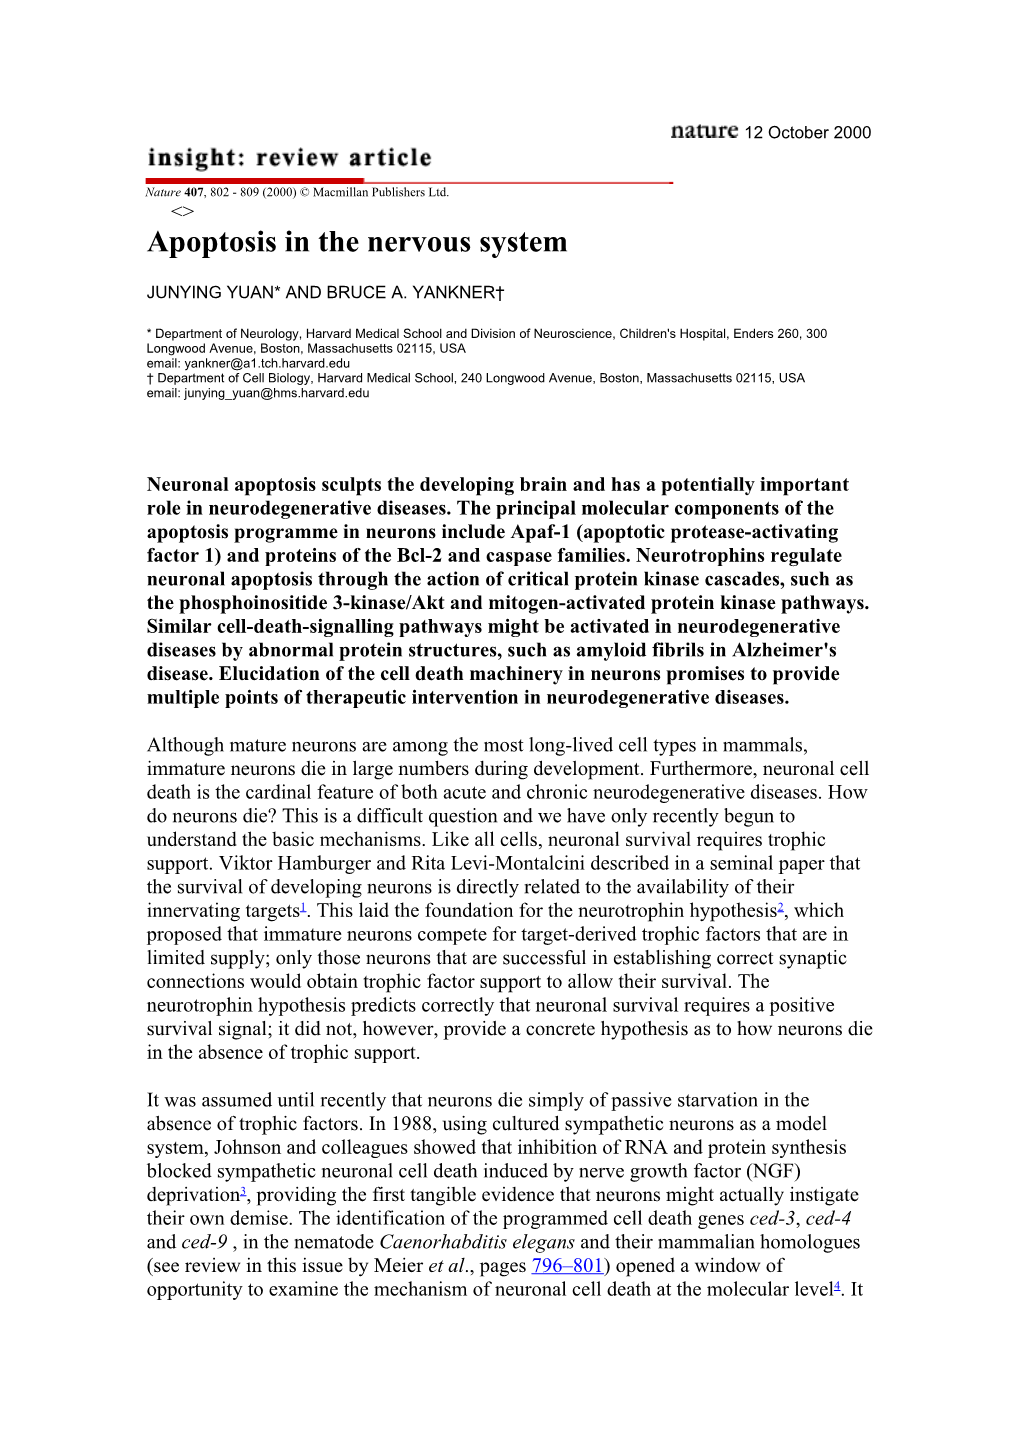 Apoptosis in the Nervous System